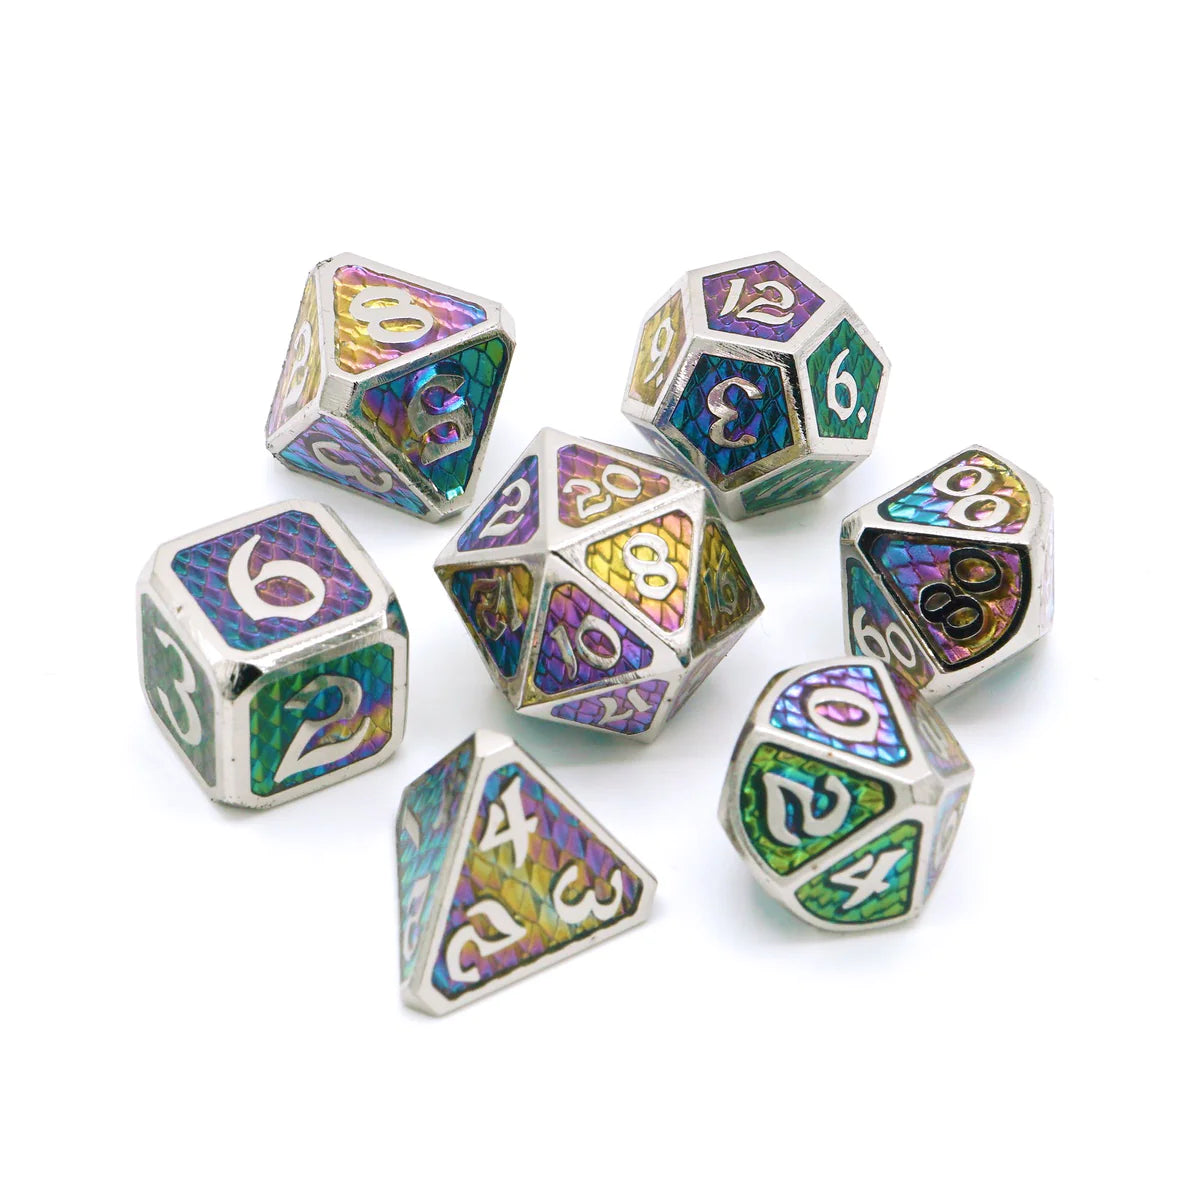 Drakona Khaos Aether RPG Dice | Anubis Games and Hobby